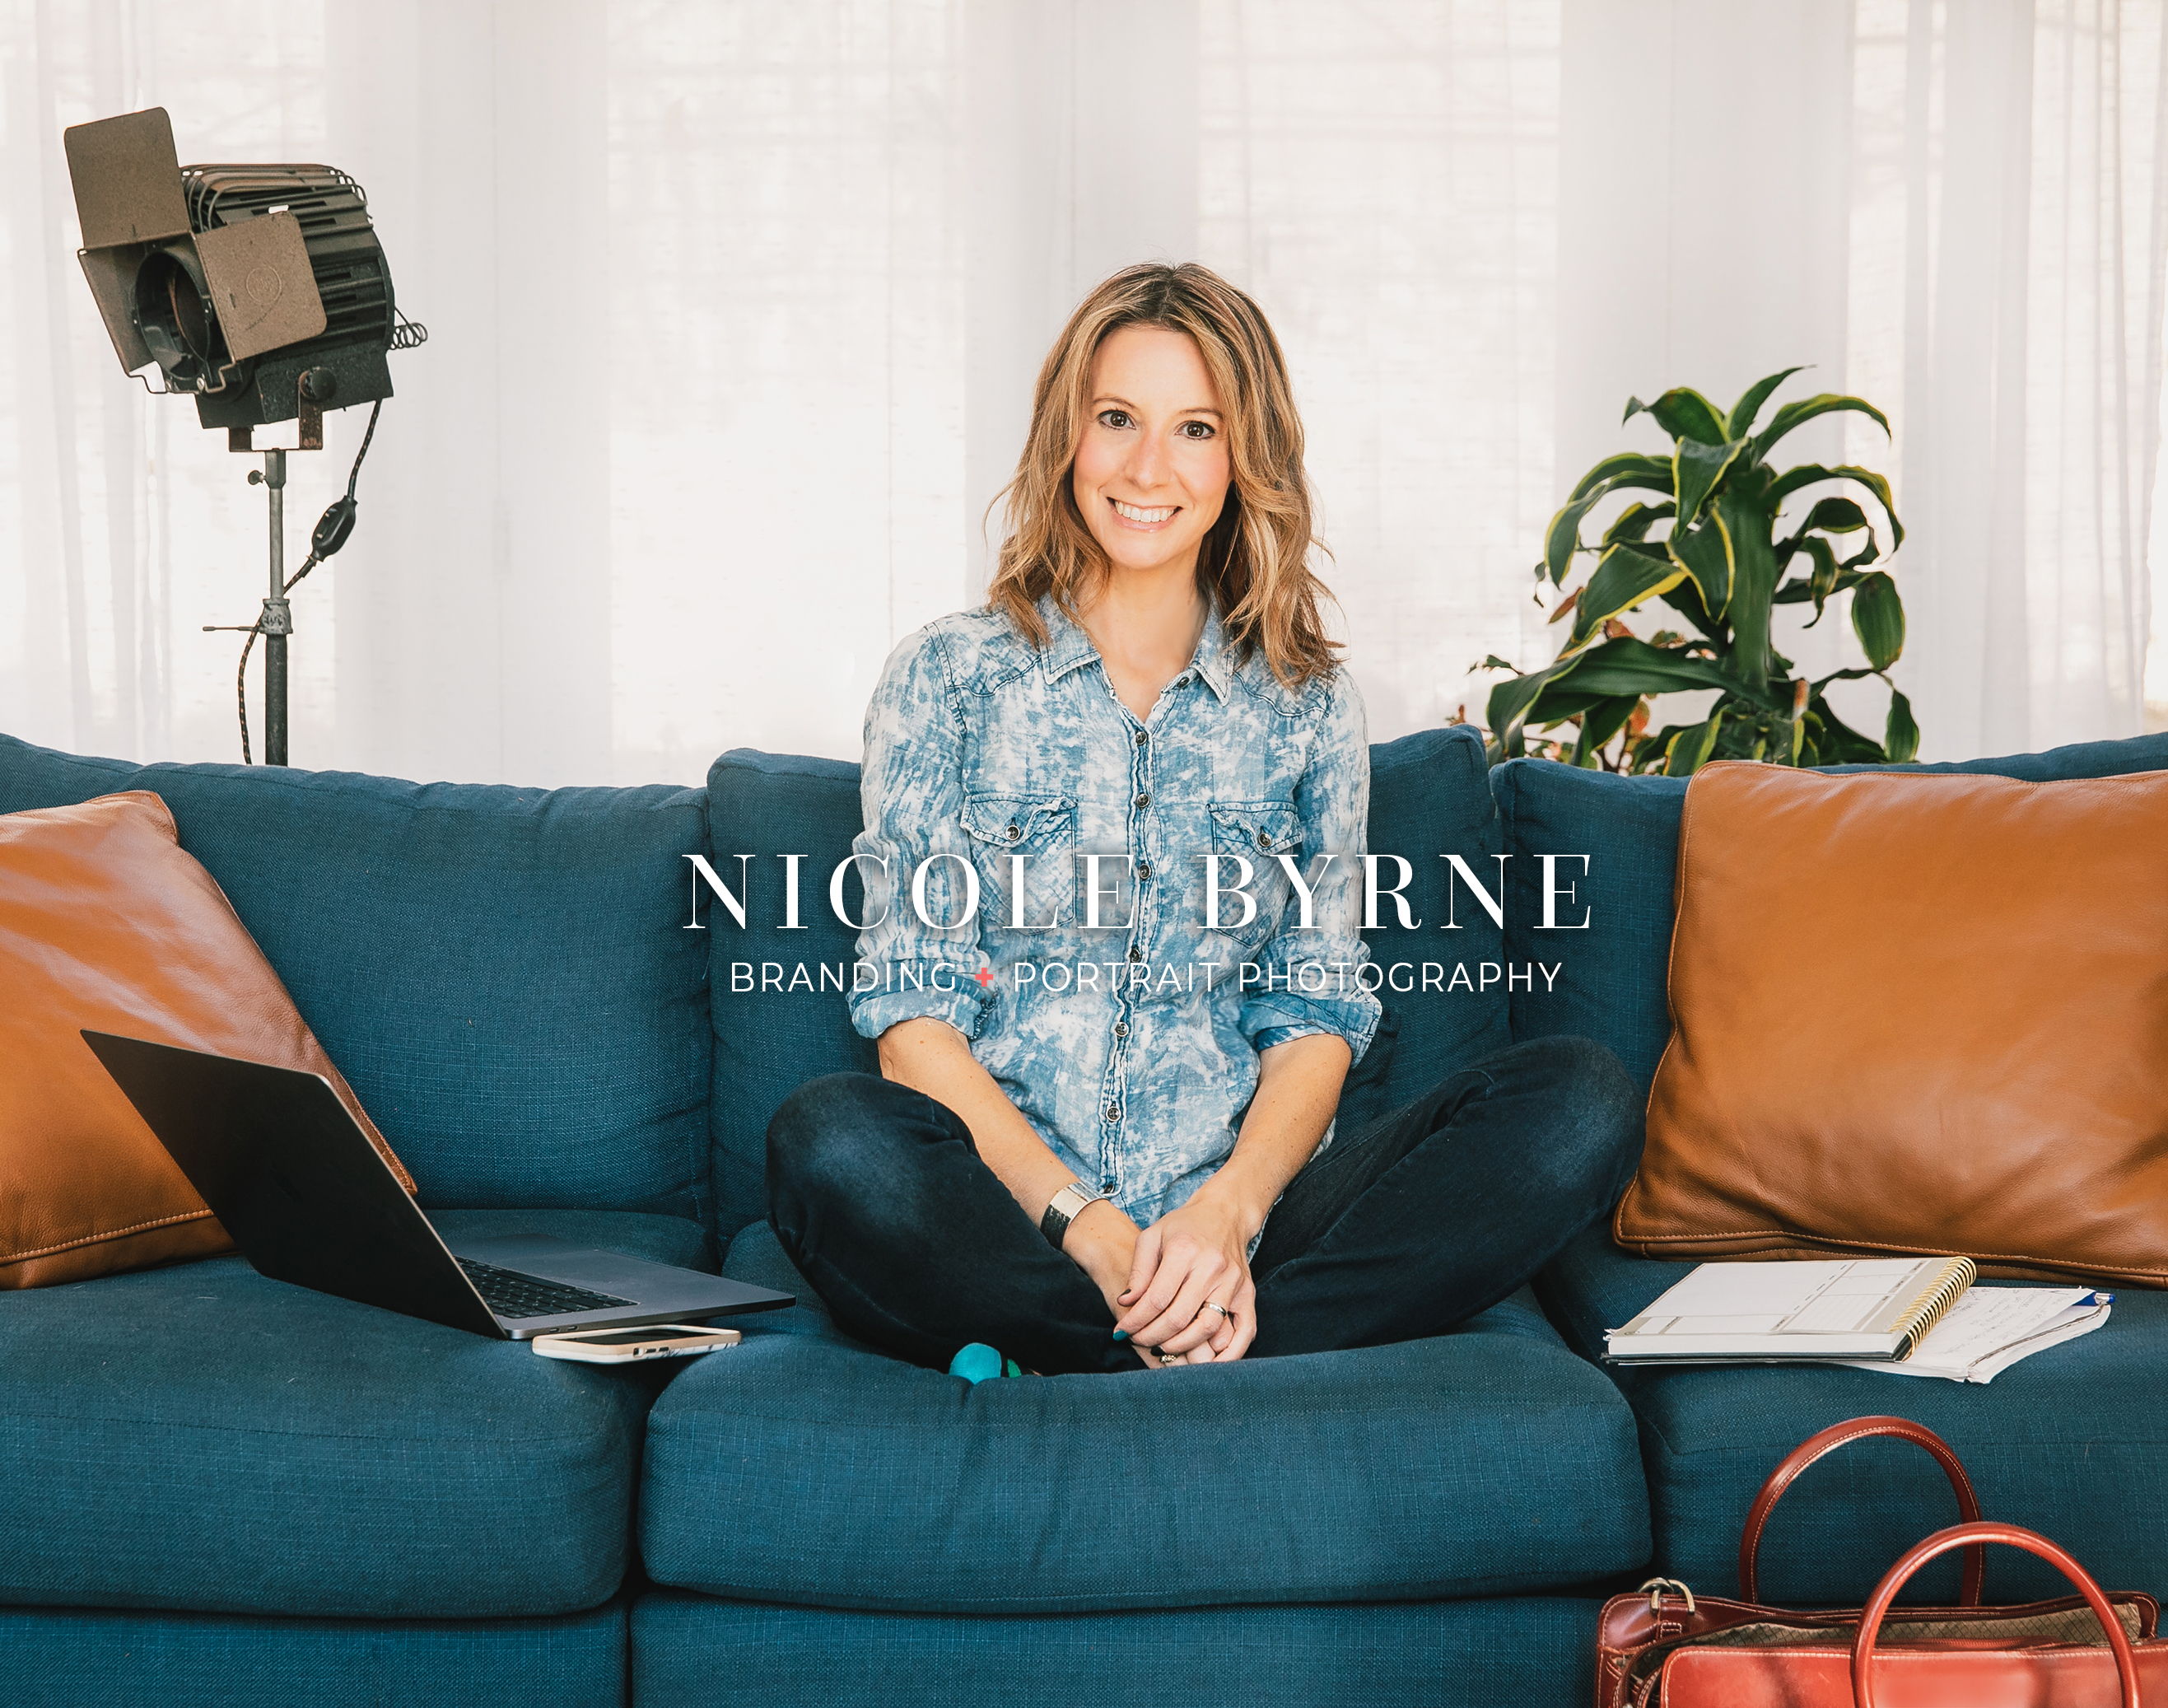 Nicole Byrne Photography - Get to know Nicole!